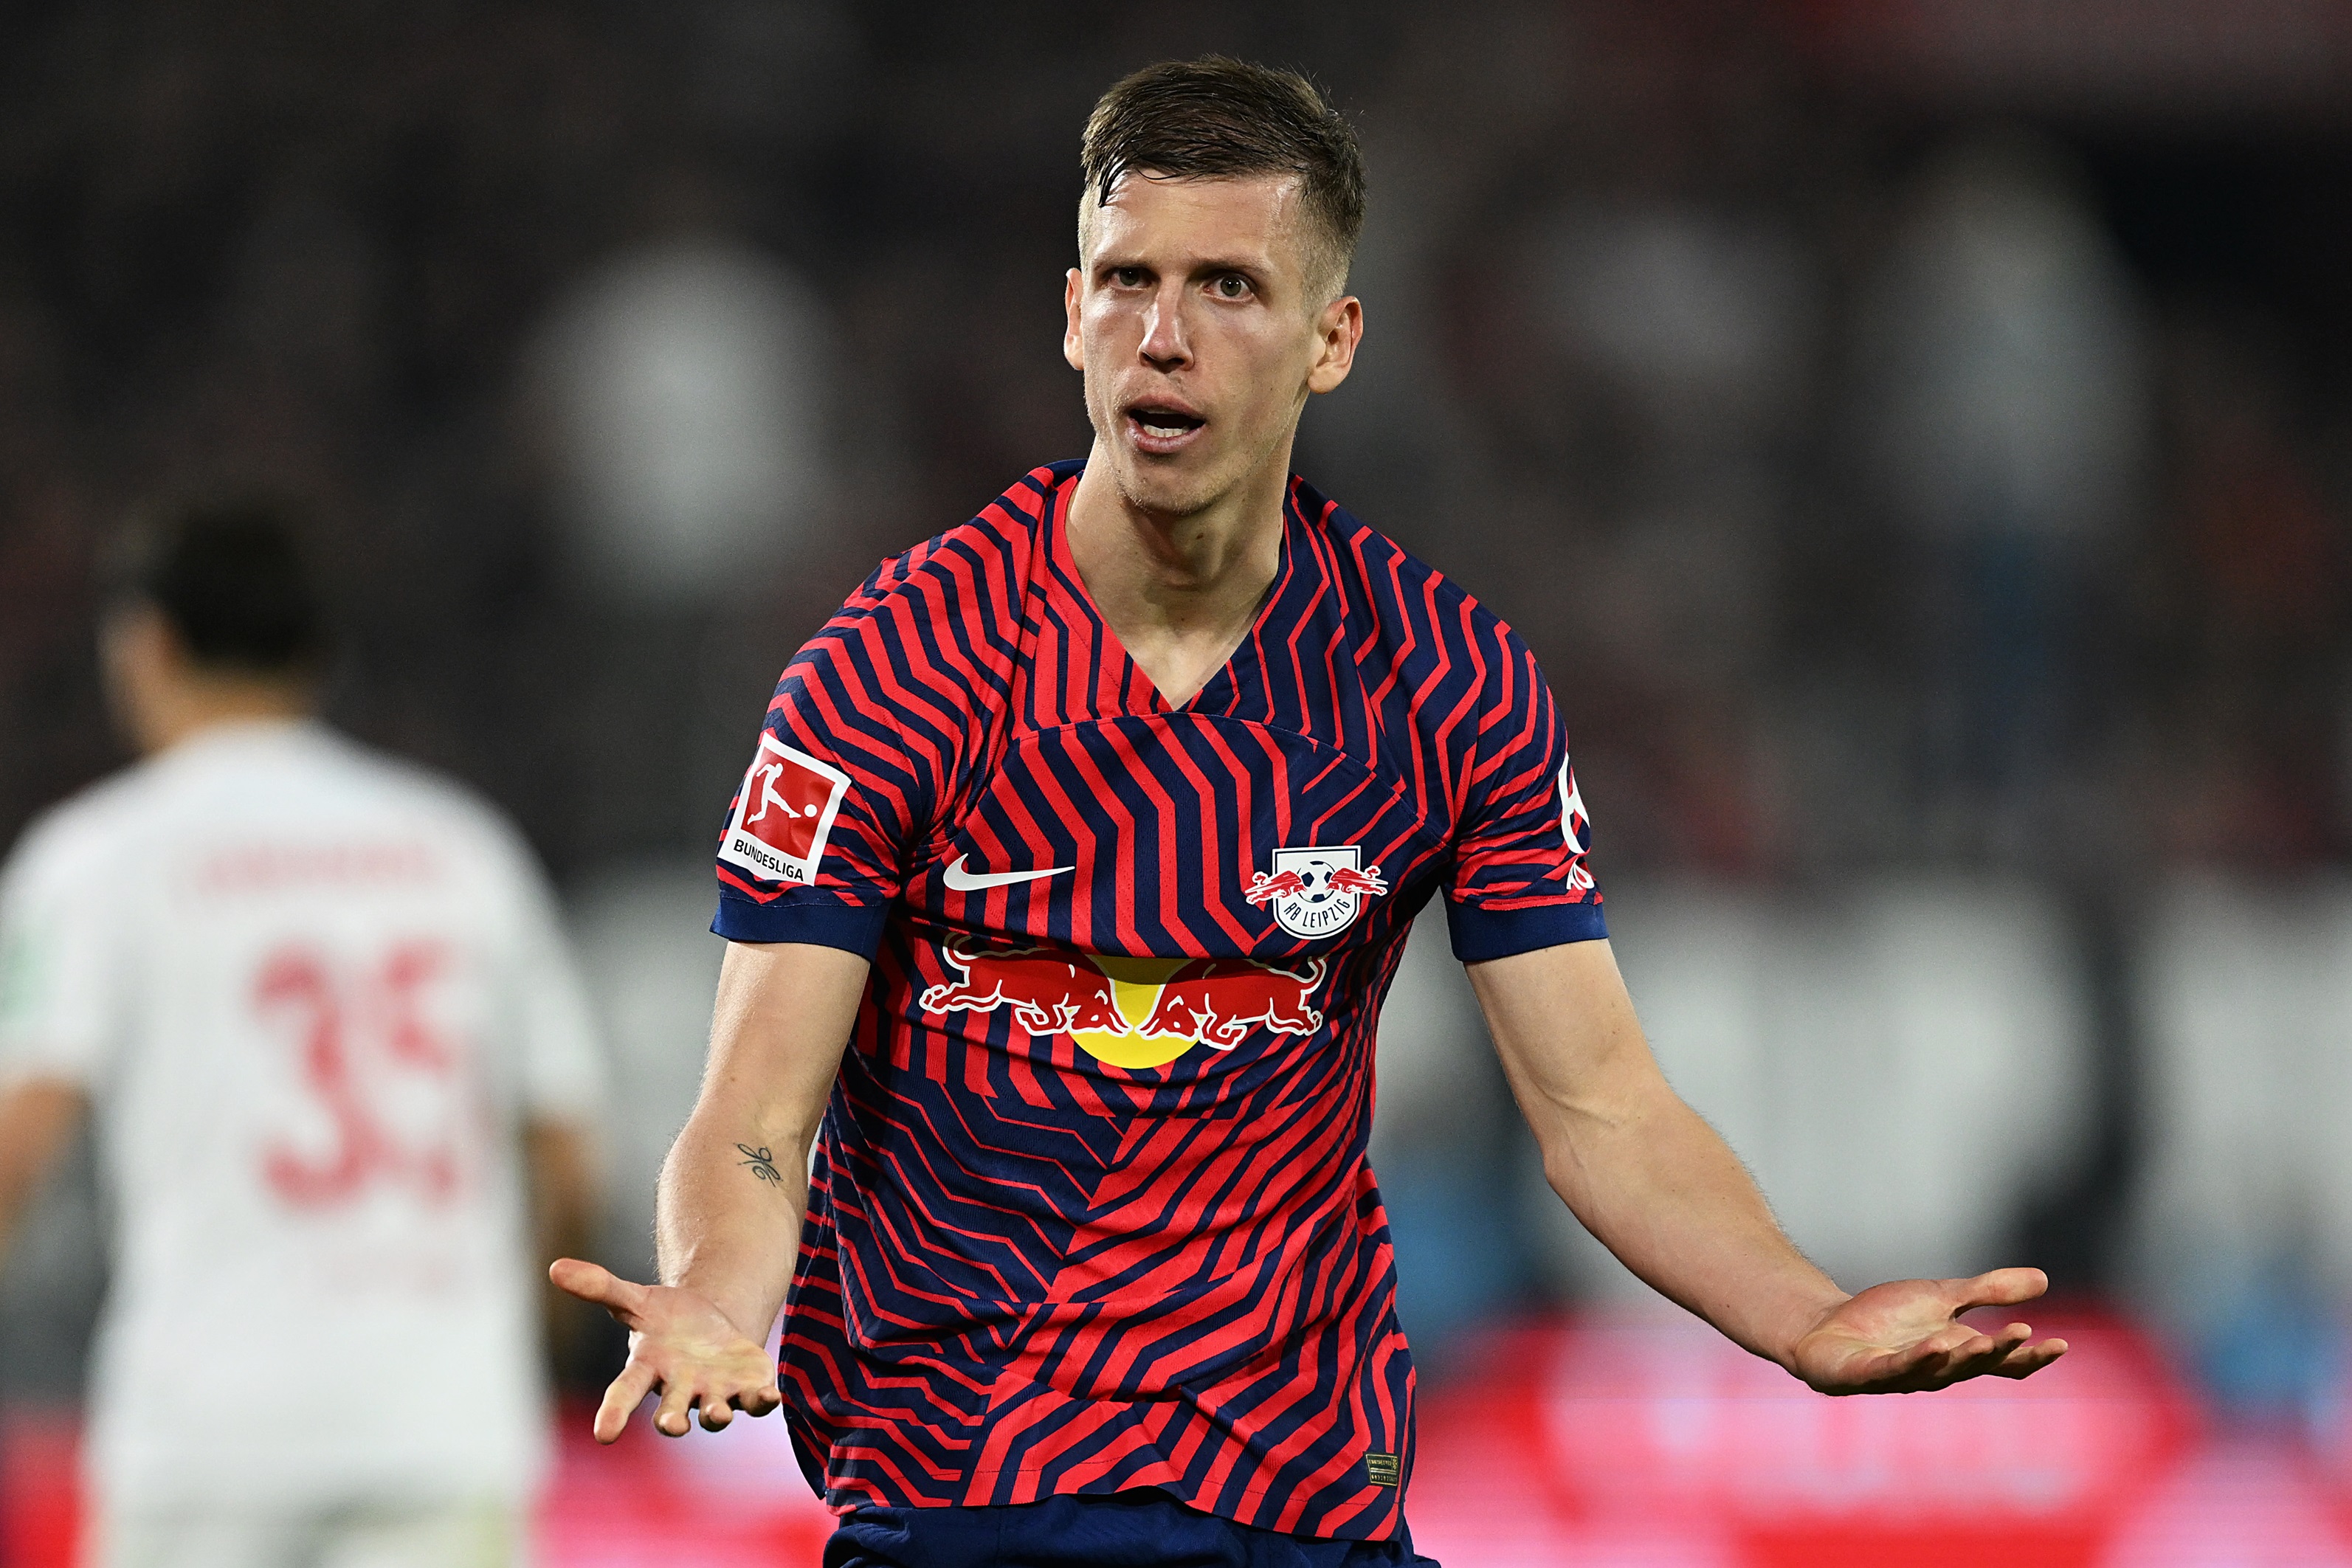 Man City are monitoring the situation of Dani Olmo at RB Leipzig very closely